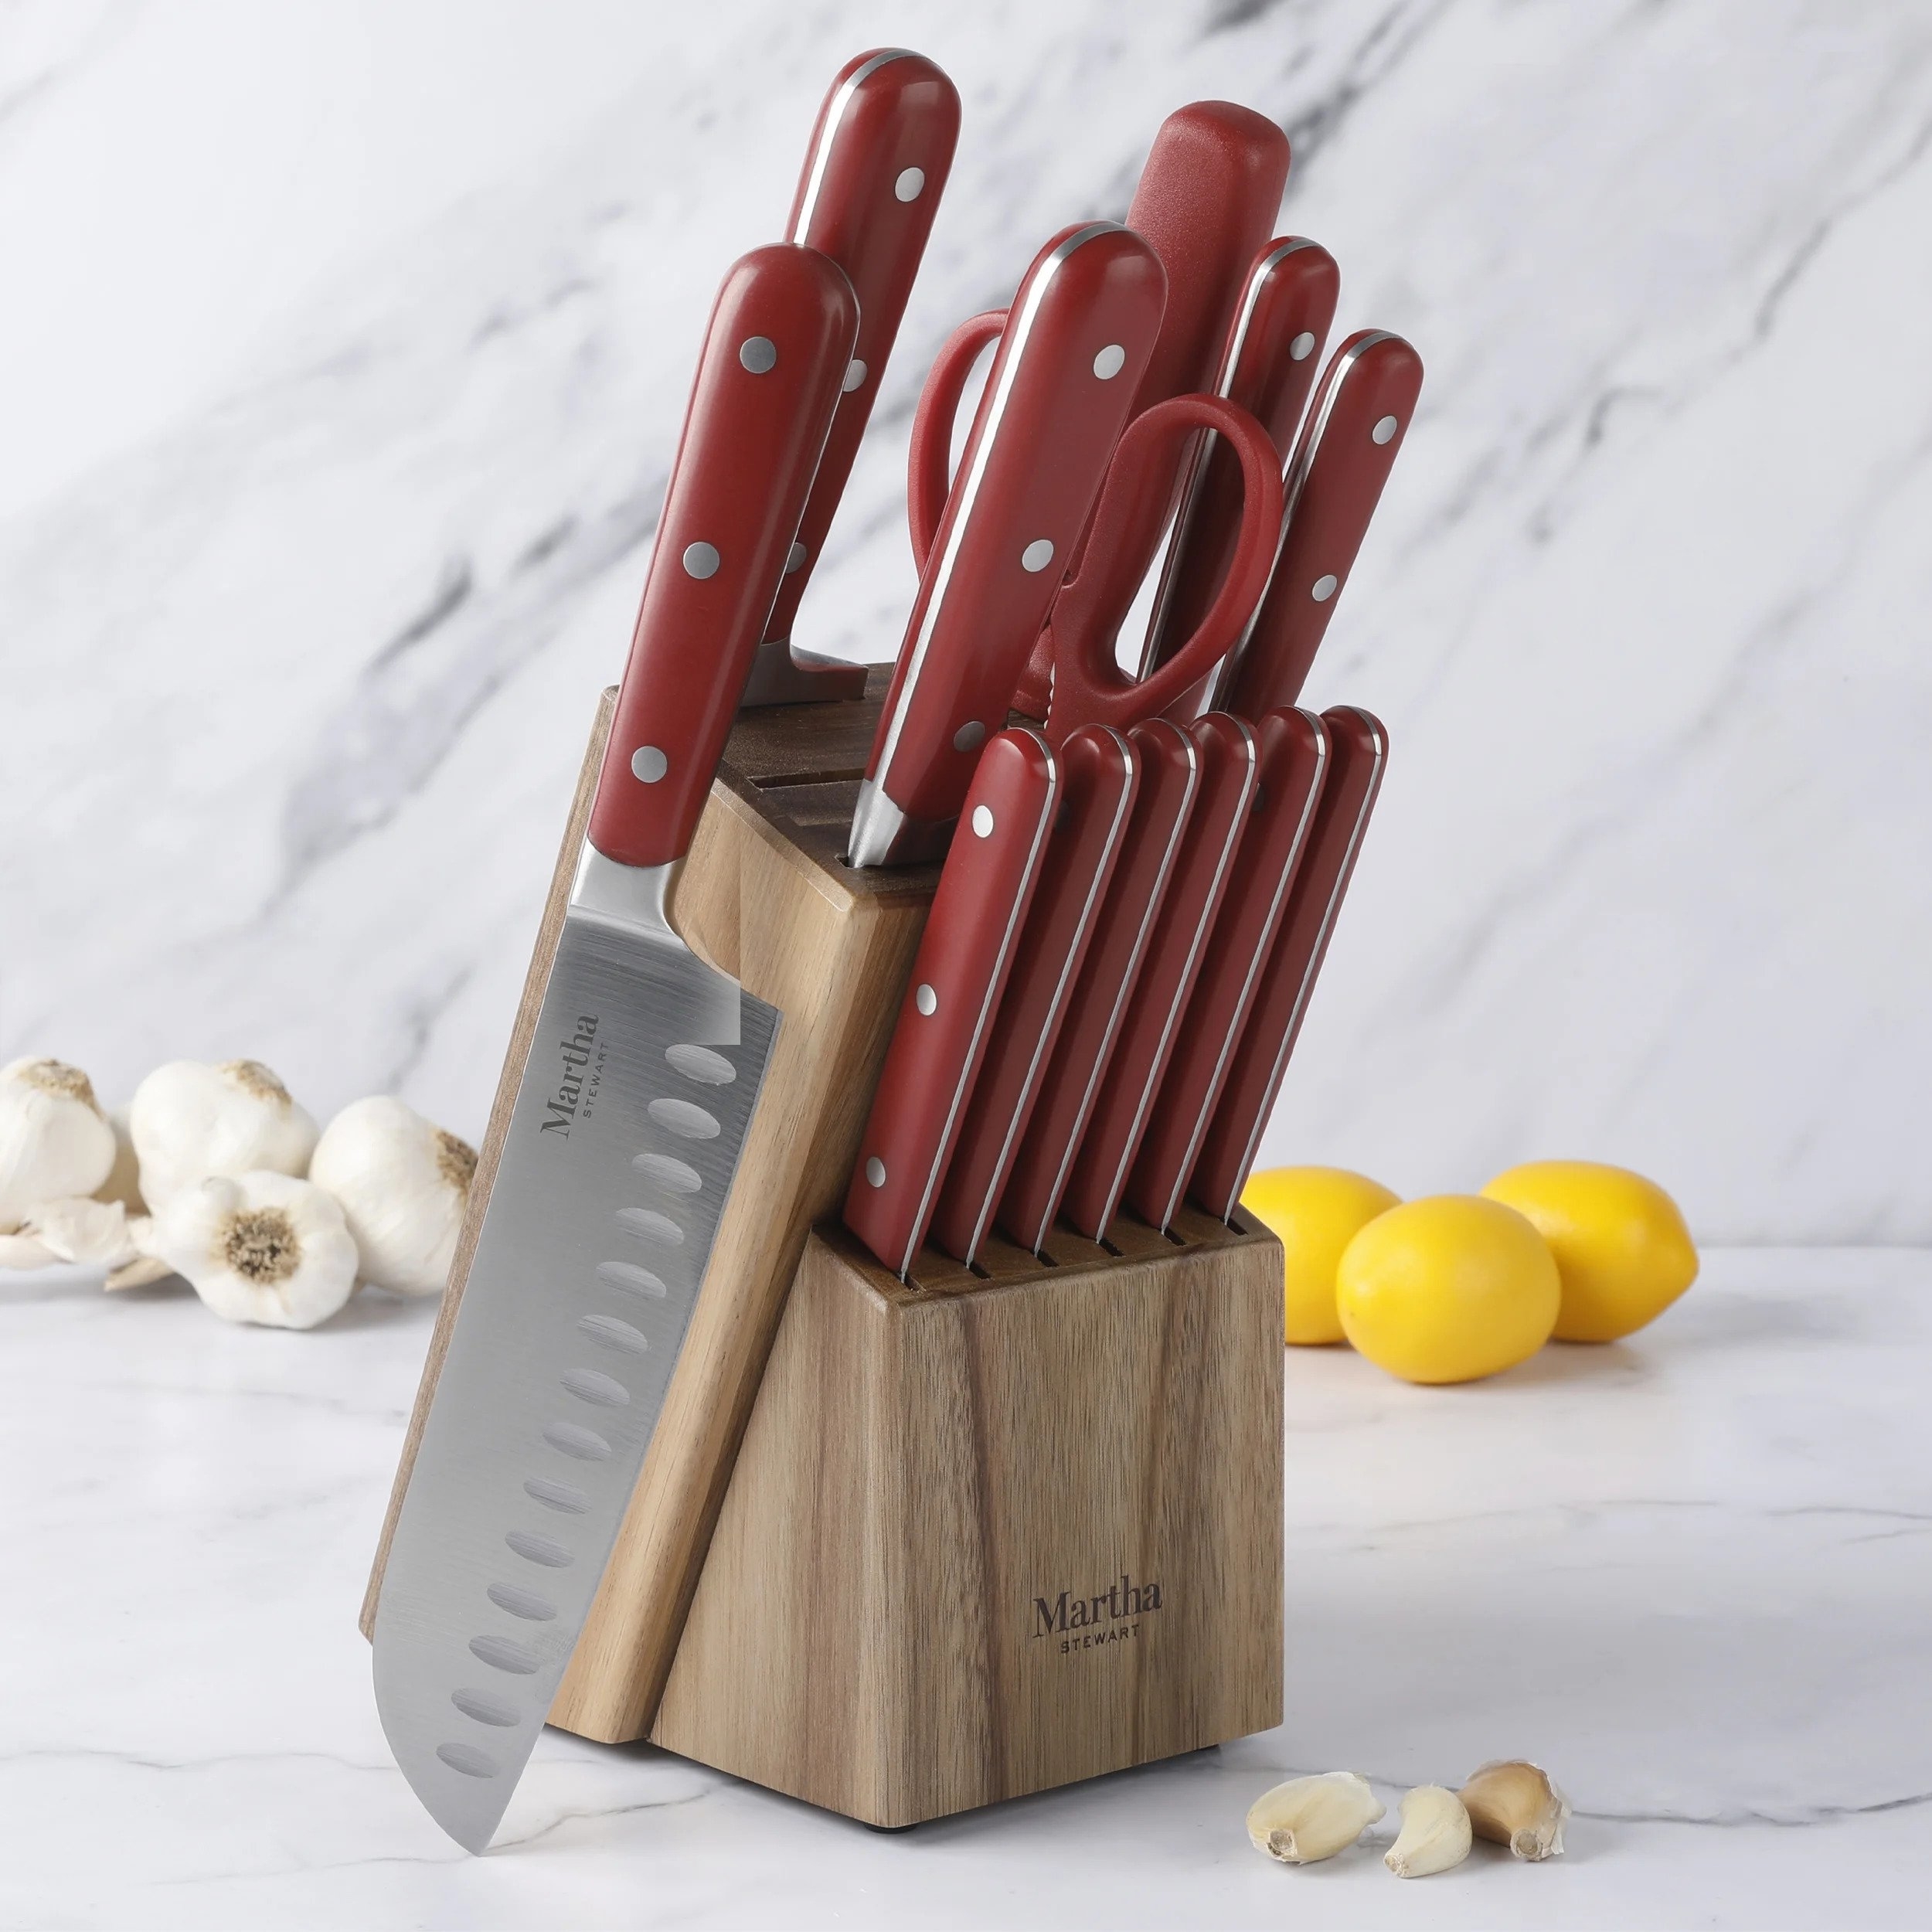 The knife set in red